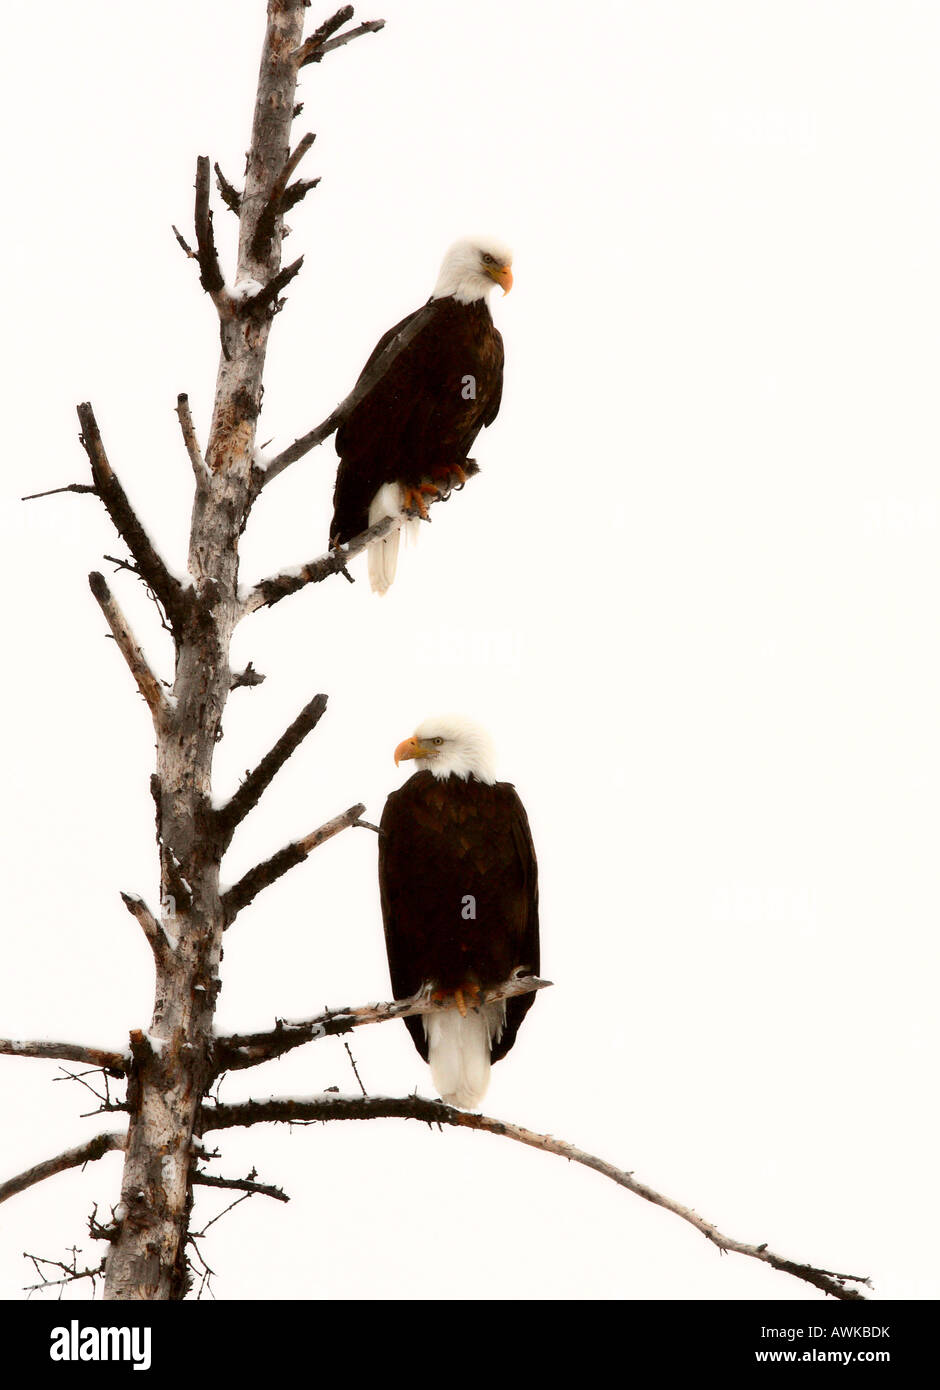 Two Bald Eagles perched in tree Stock Photo